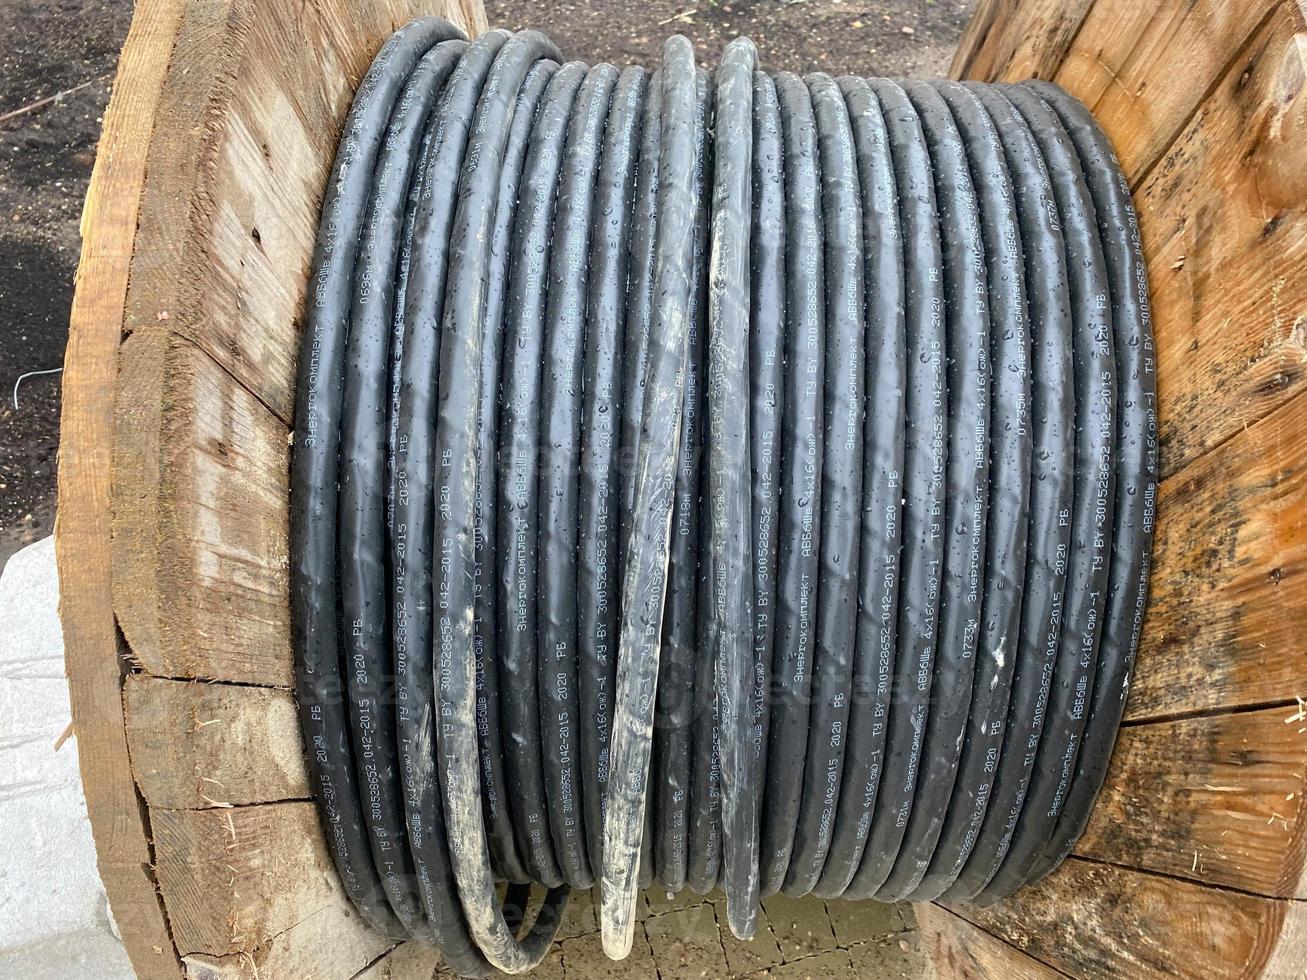 Large spool with black thick electrical wire or cable. Wooden coil with electrical industrial wires at a construction site photo